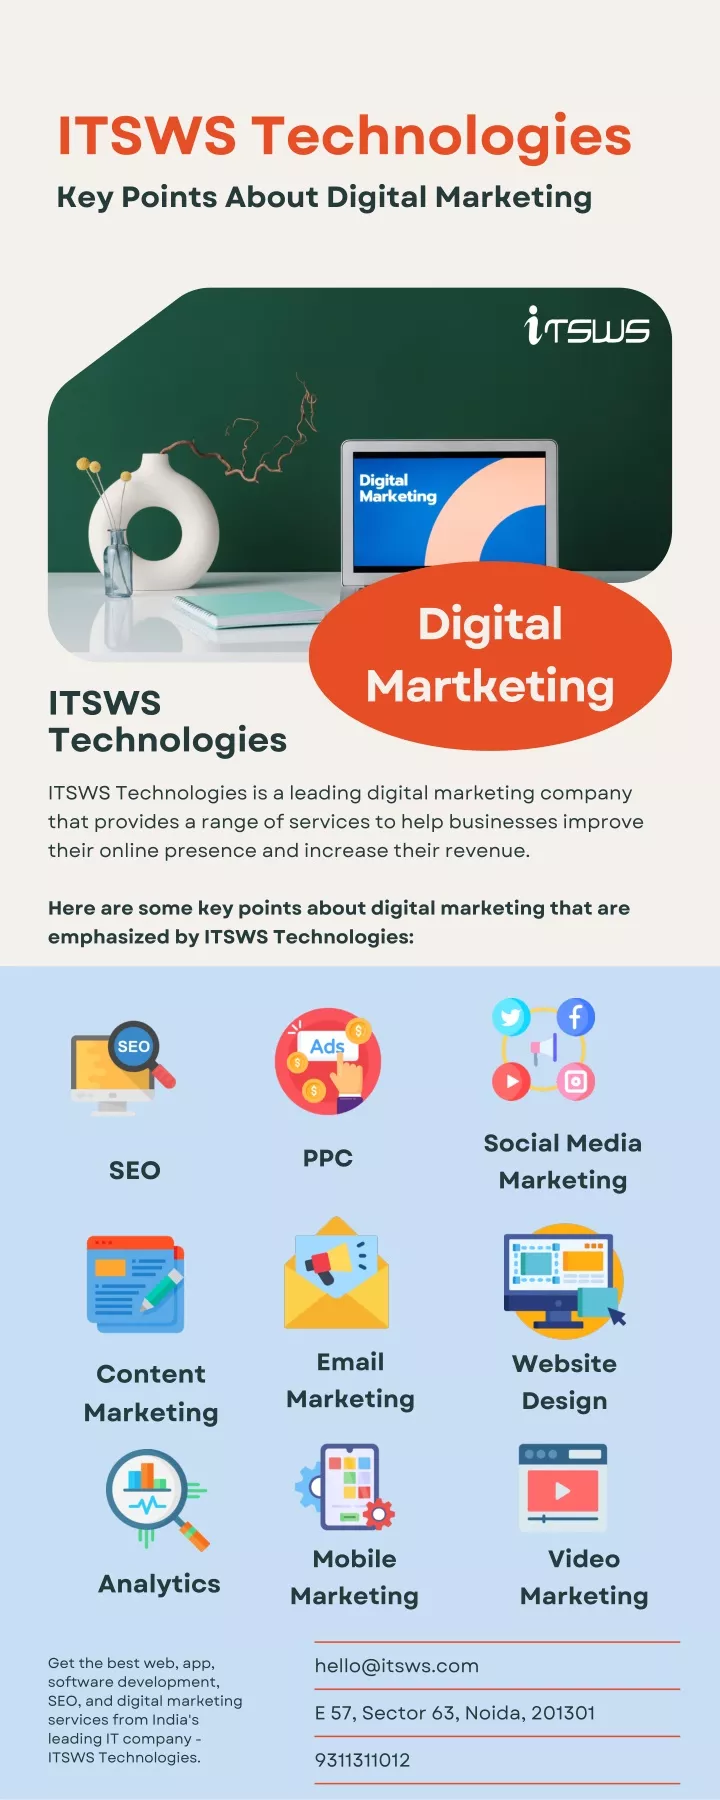 itsws technologies key points about digital